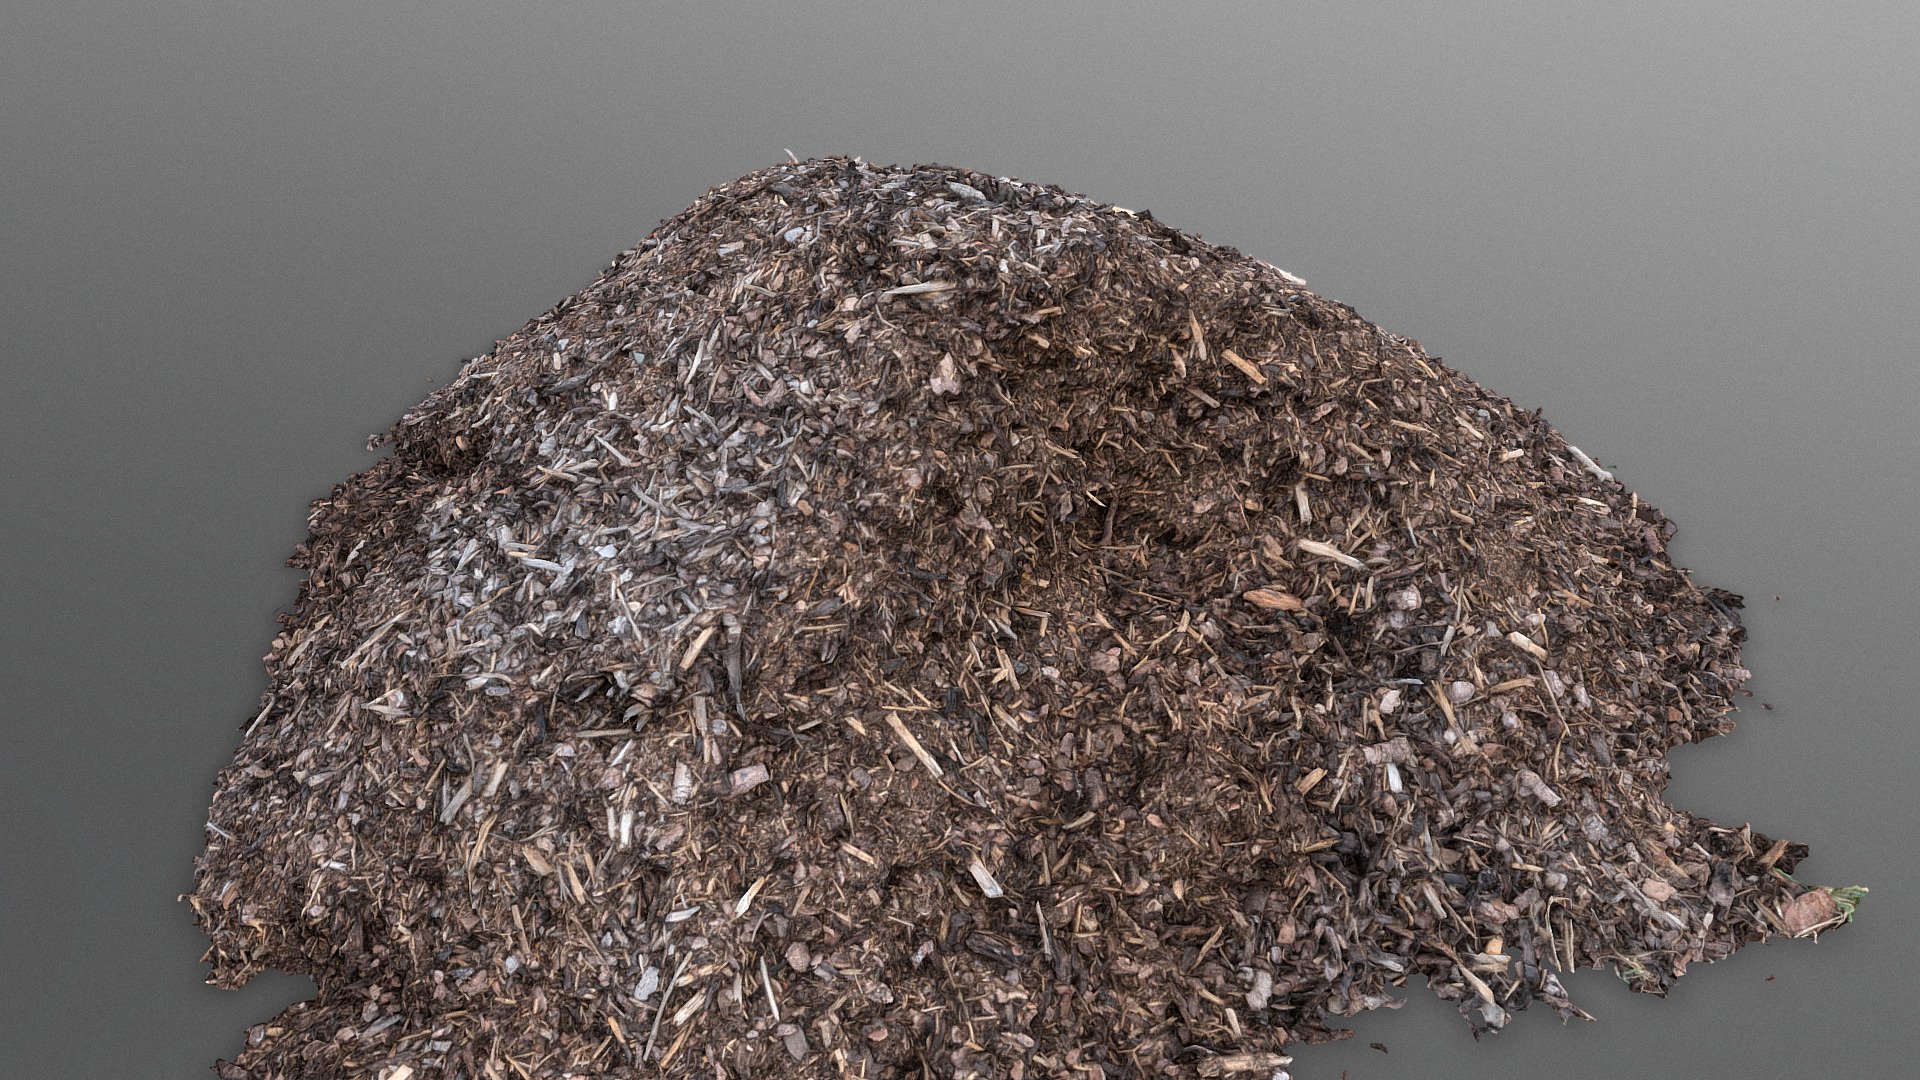 Wood woodchips wooden chips shards mulch pulp tree mulch bark pile heap

photogrammetry scan (80x36mp) + hd normals  (as additional .zip download) - Wood chips mulch pile - Buy Royalty Free 3D model by axonite 3d model